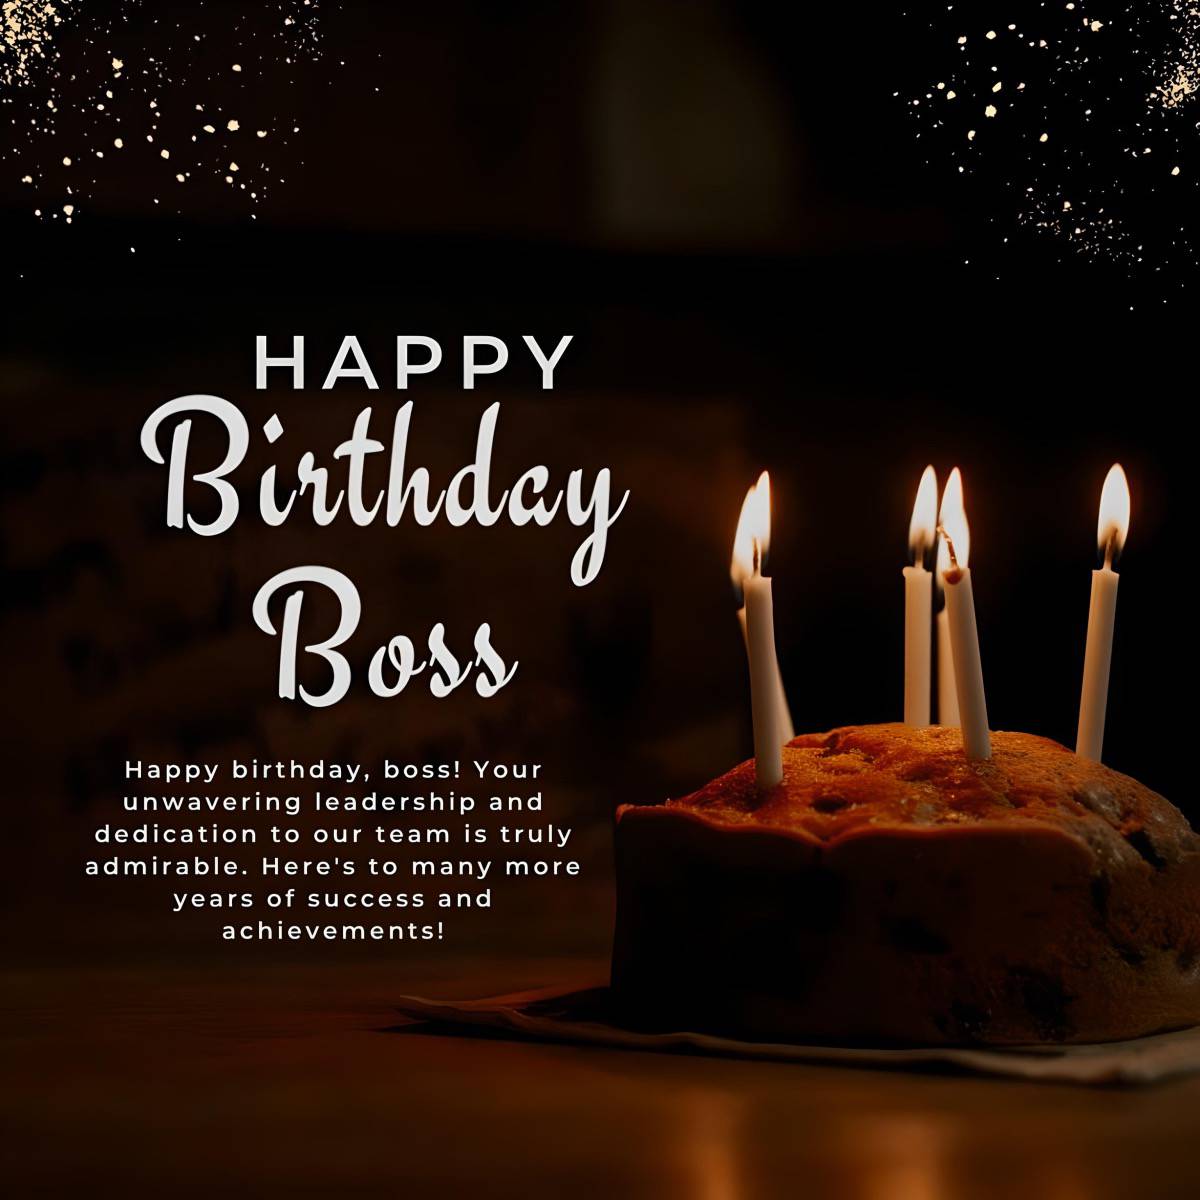 Happy Birthday Messages and Wishes for Bosses